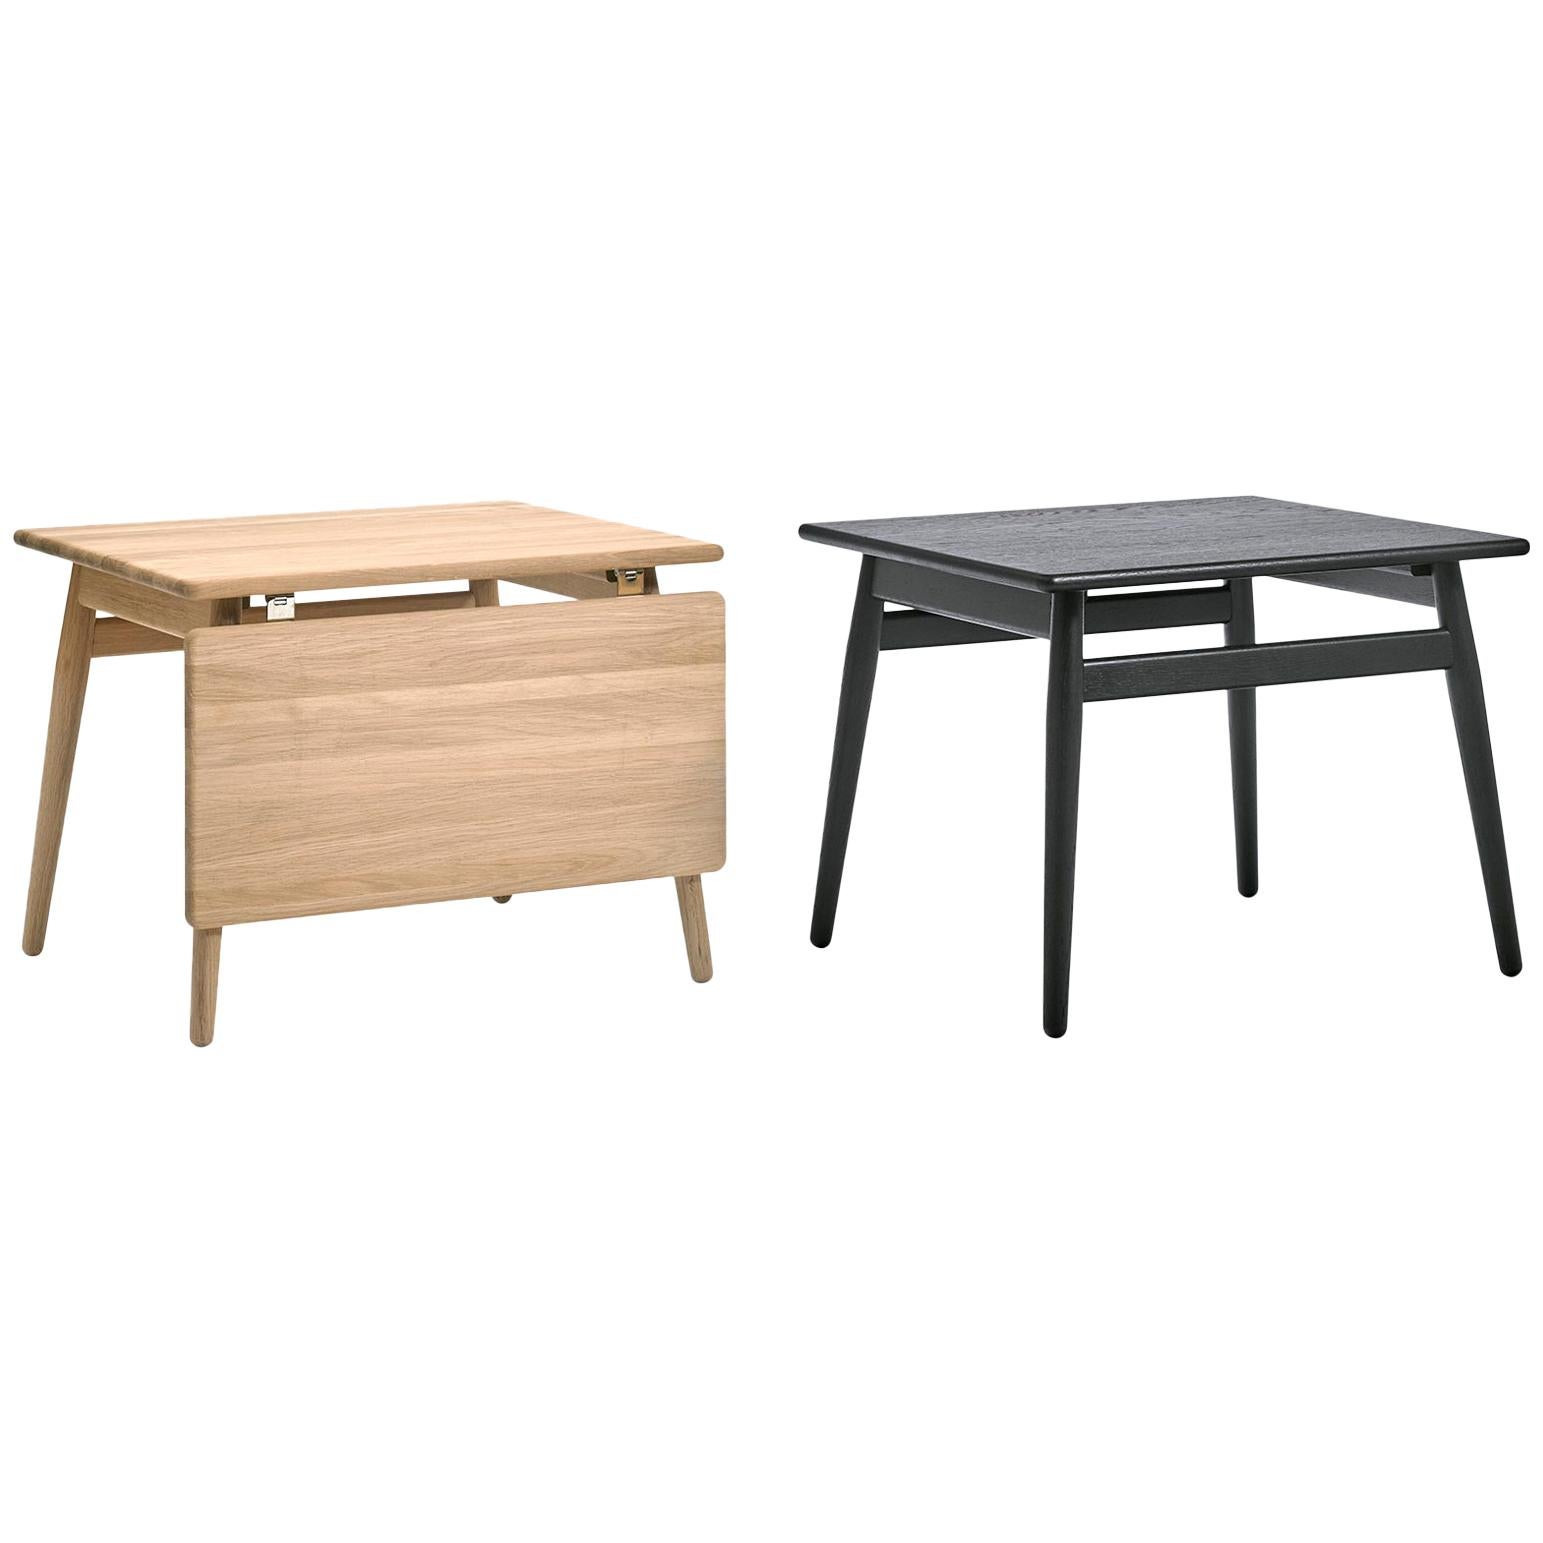 Nanna and Jorgen Ditzel ND-55 Coffee Table with Leaf